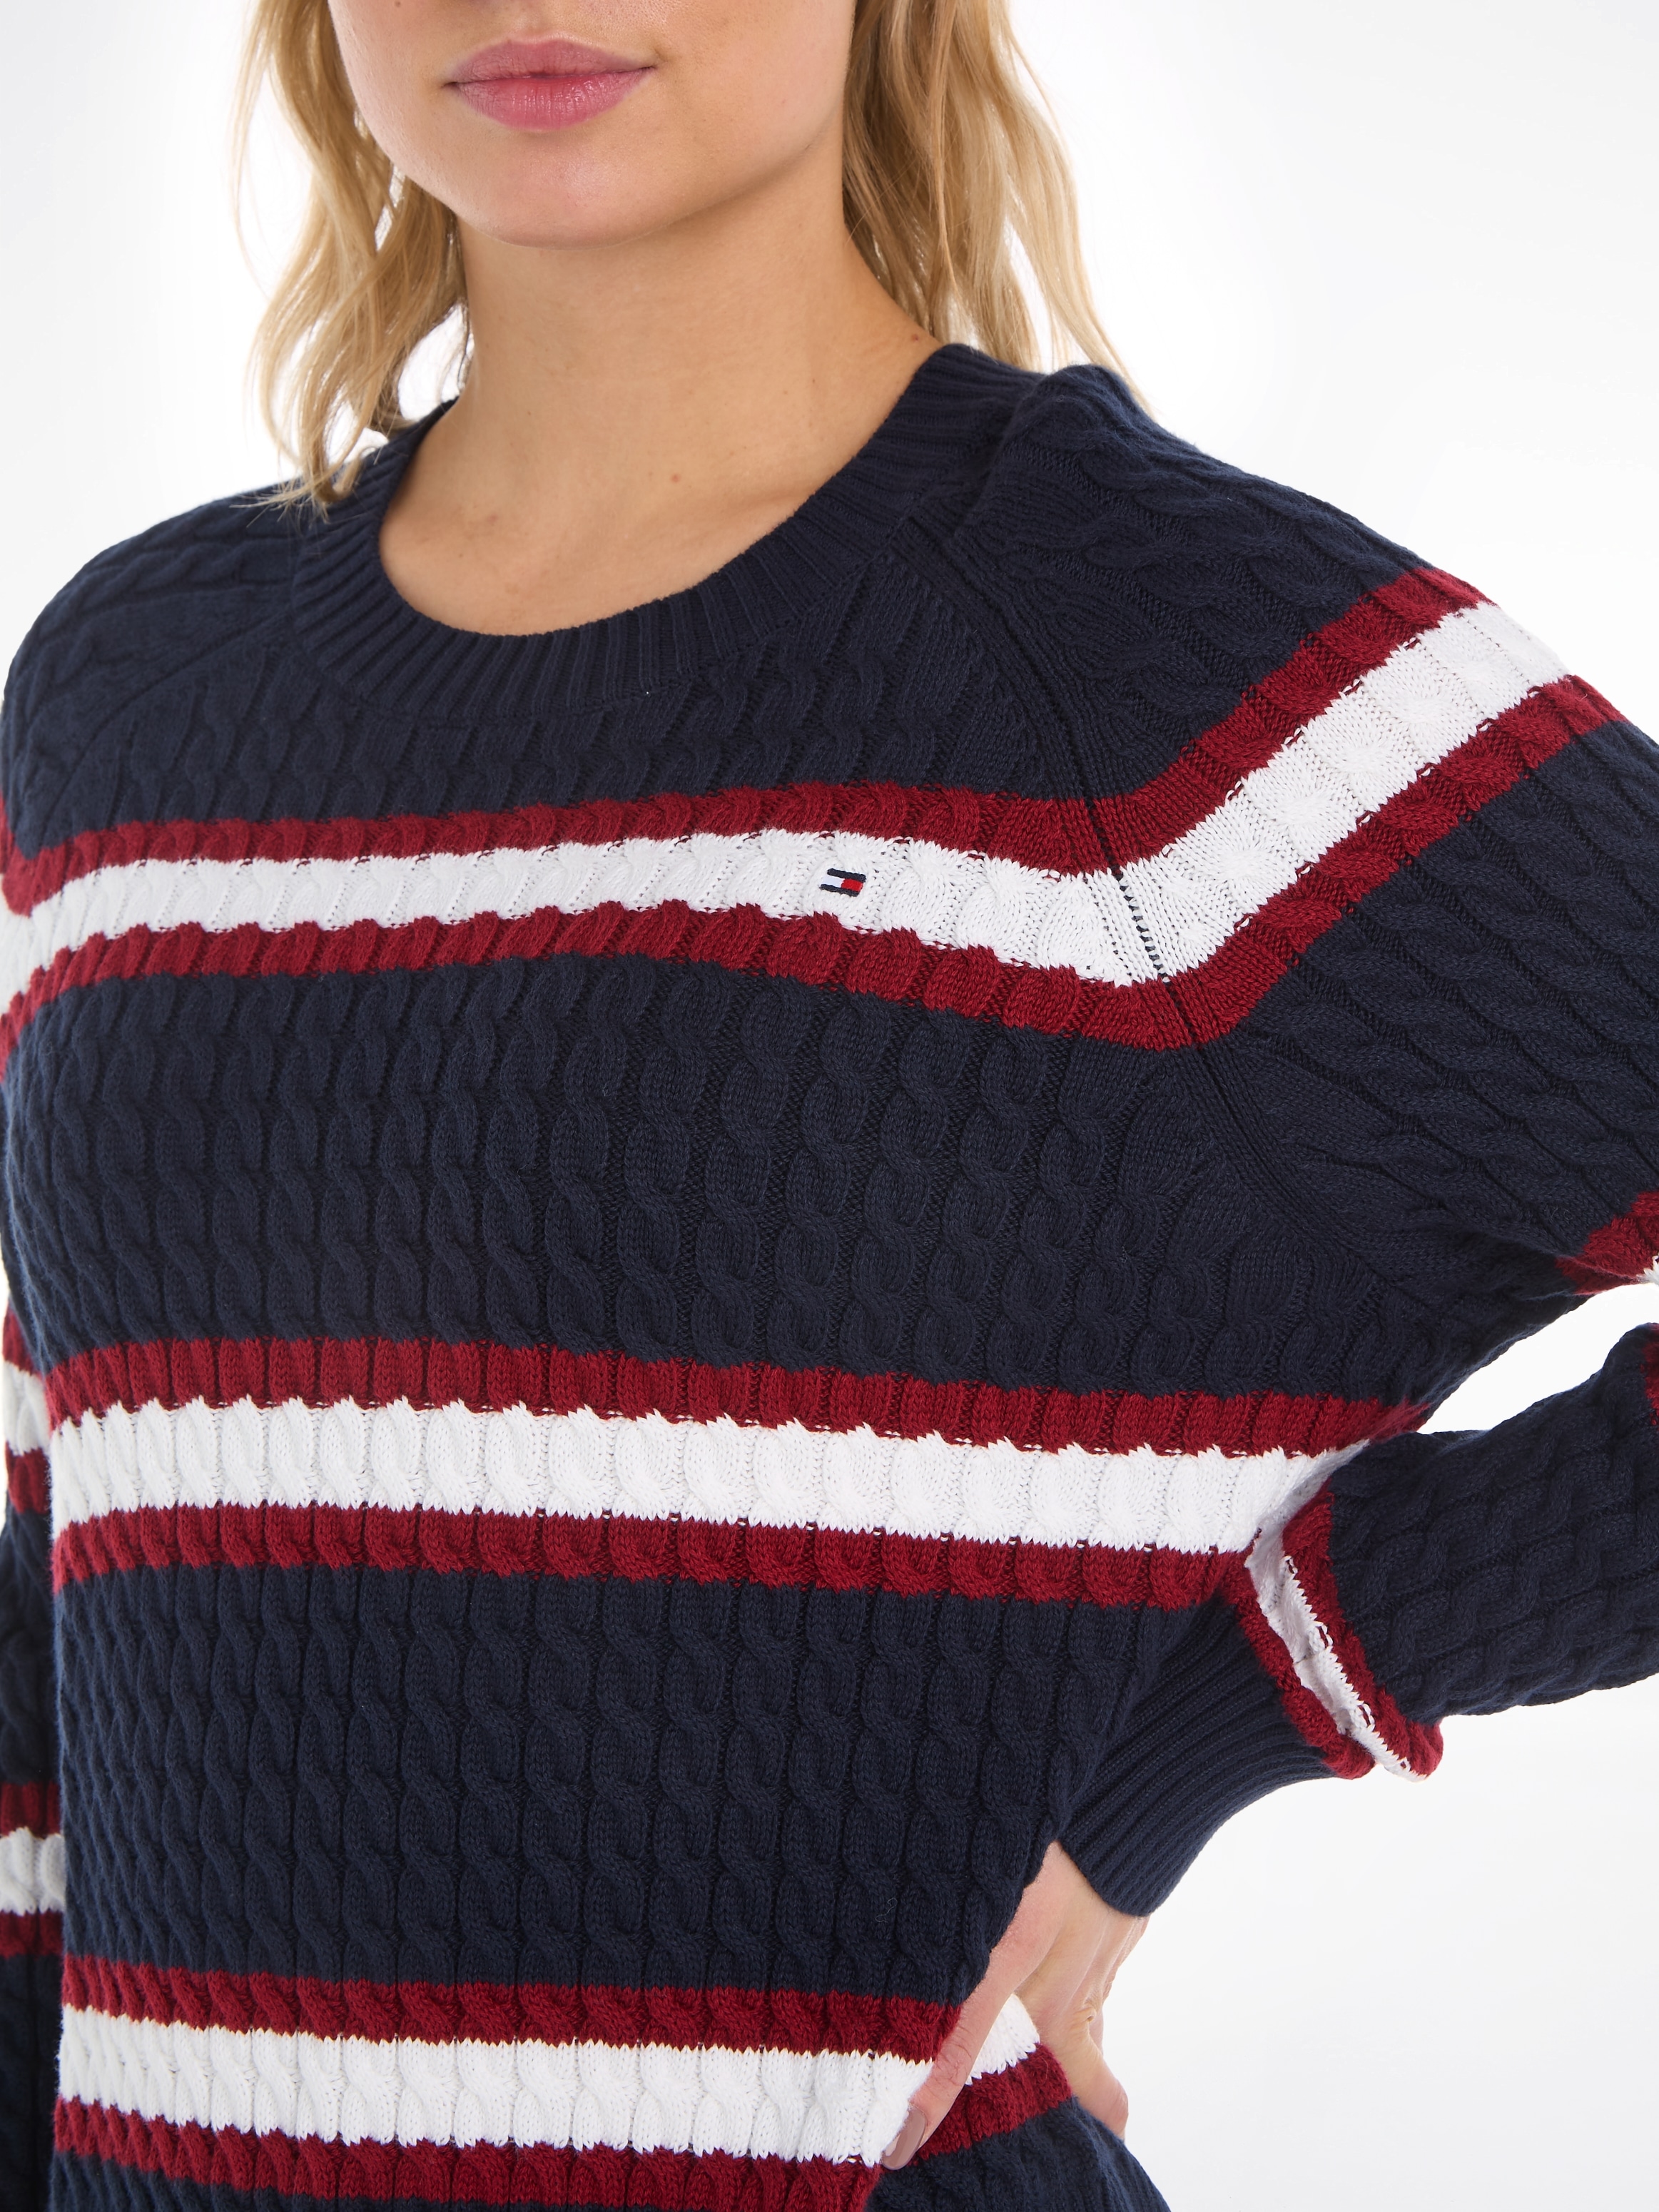 Tommy Hilfiger Strickpullover mit SWEATER«, ♕ »CO MINI C-NECK bei Logostickerei CABLE